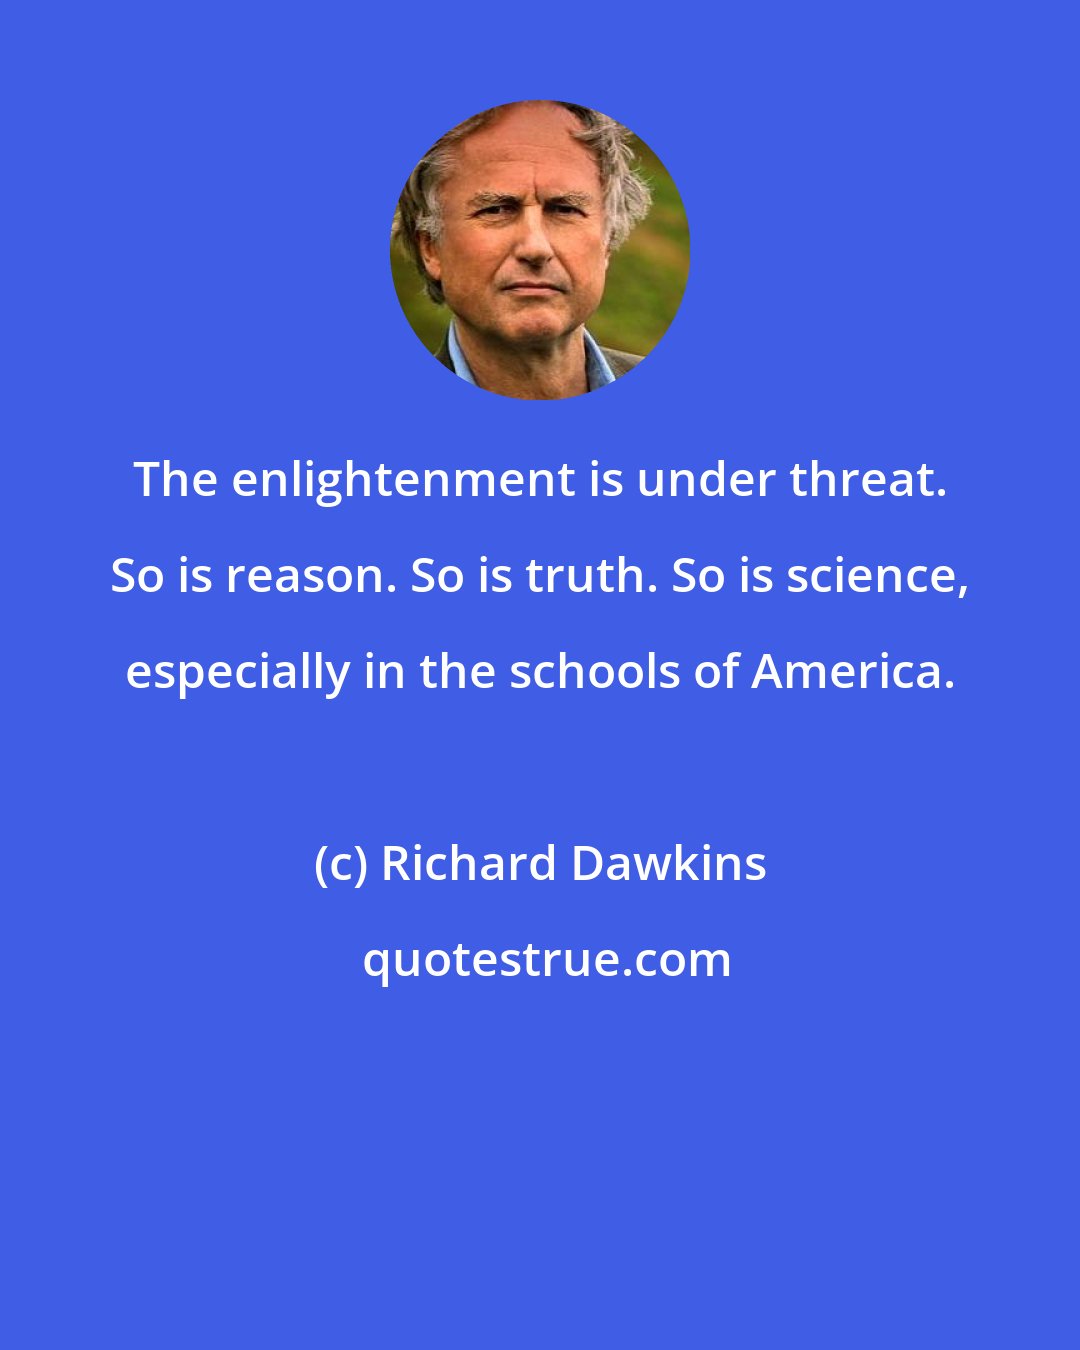 Richard Dawkins: The enlightenment is under threat. So is reason. So is truth. So is science, especially in the schools of America.